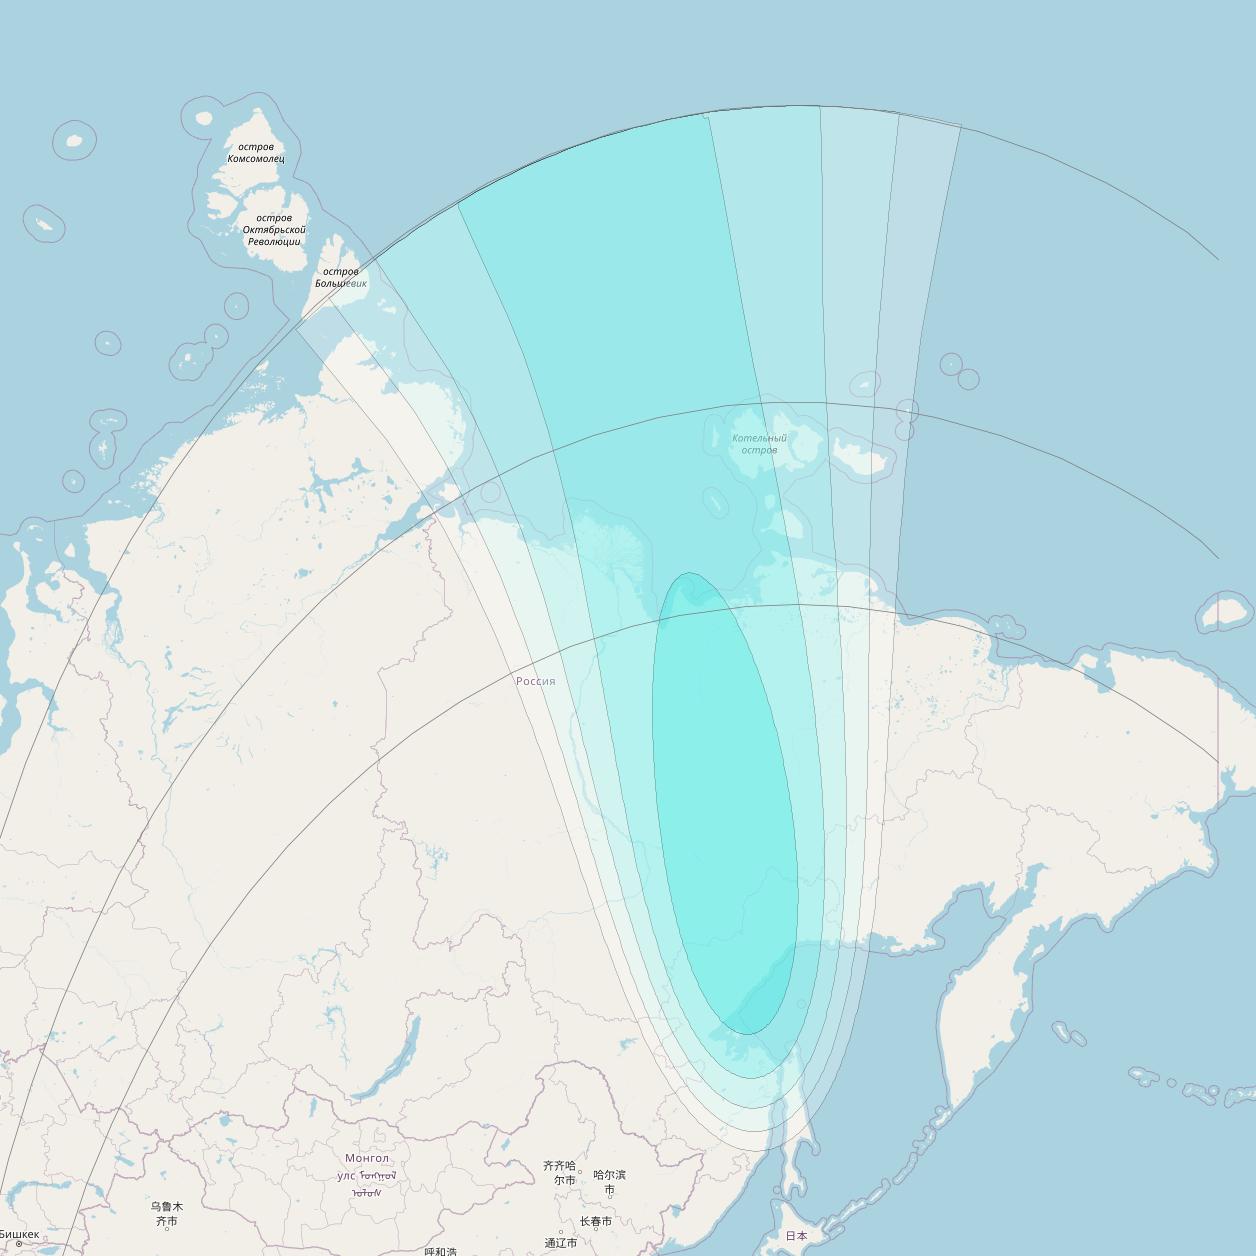 Inmarsat-4F1 at 143° E downlink L-band S096 User Spot beam coverage map